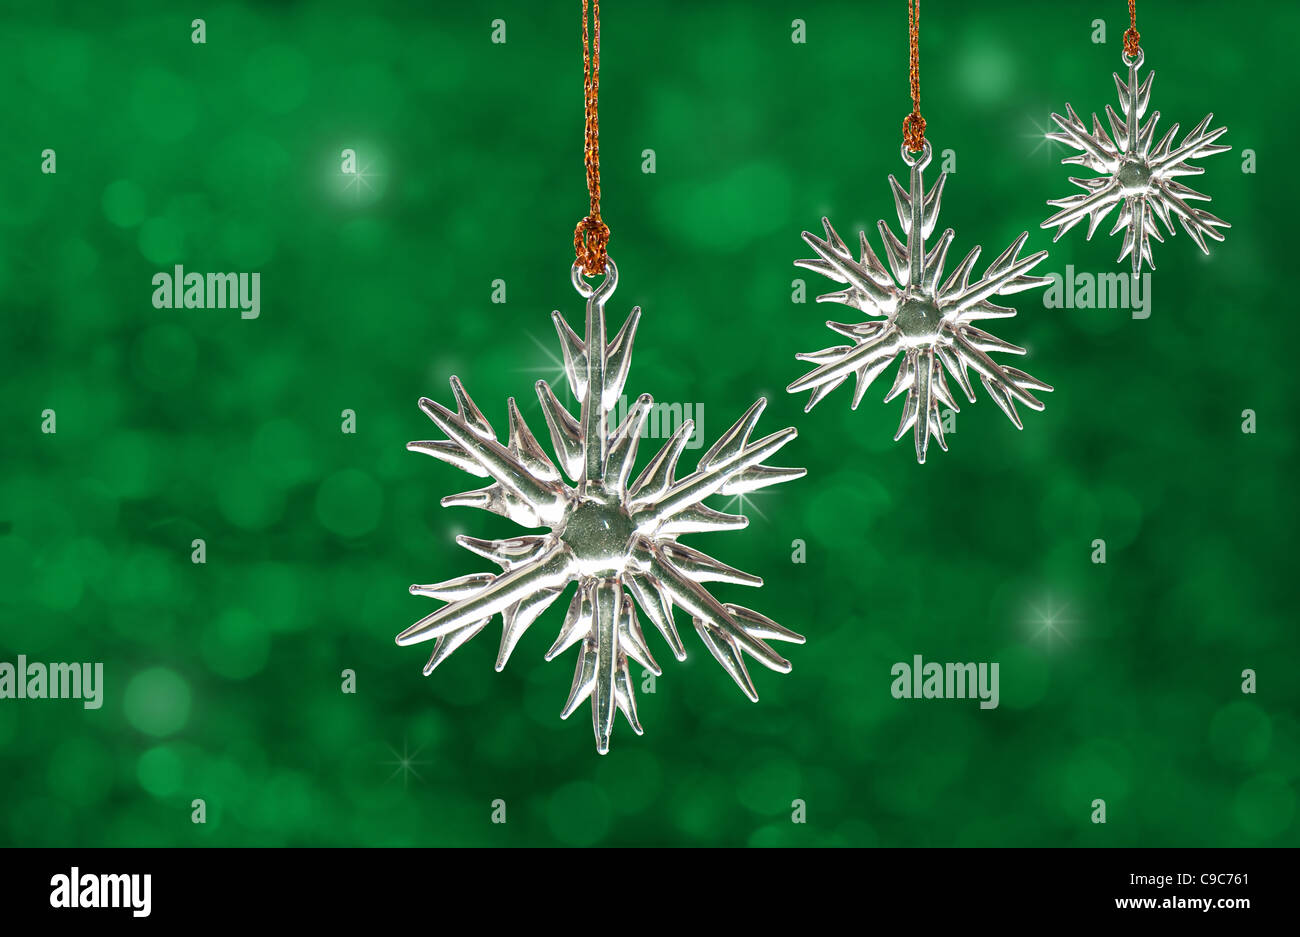 Dreamy image of glass snowflake Christmas ornaments on green background Stock Photo